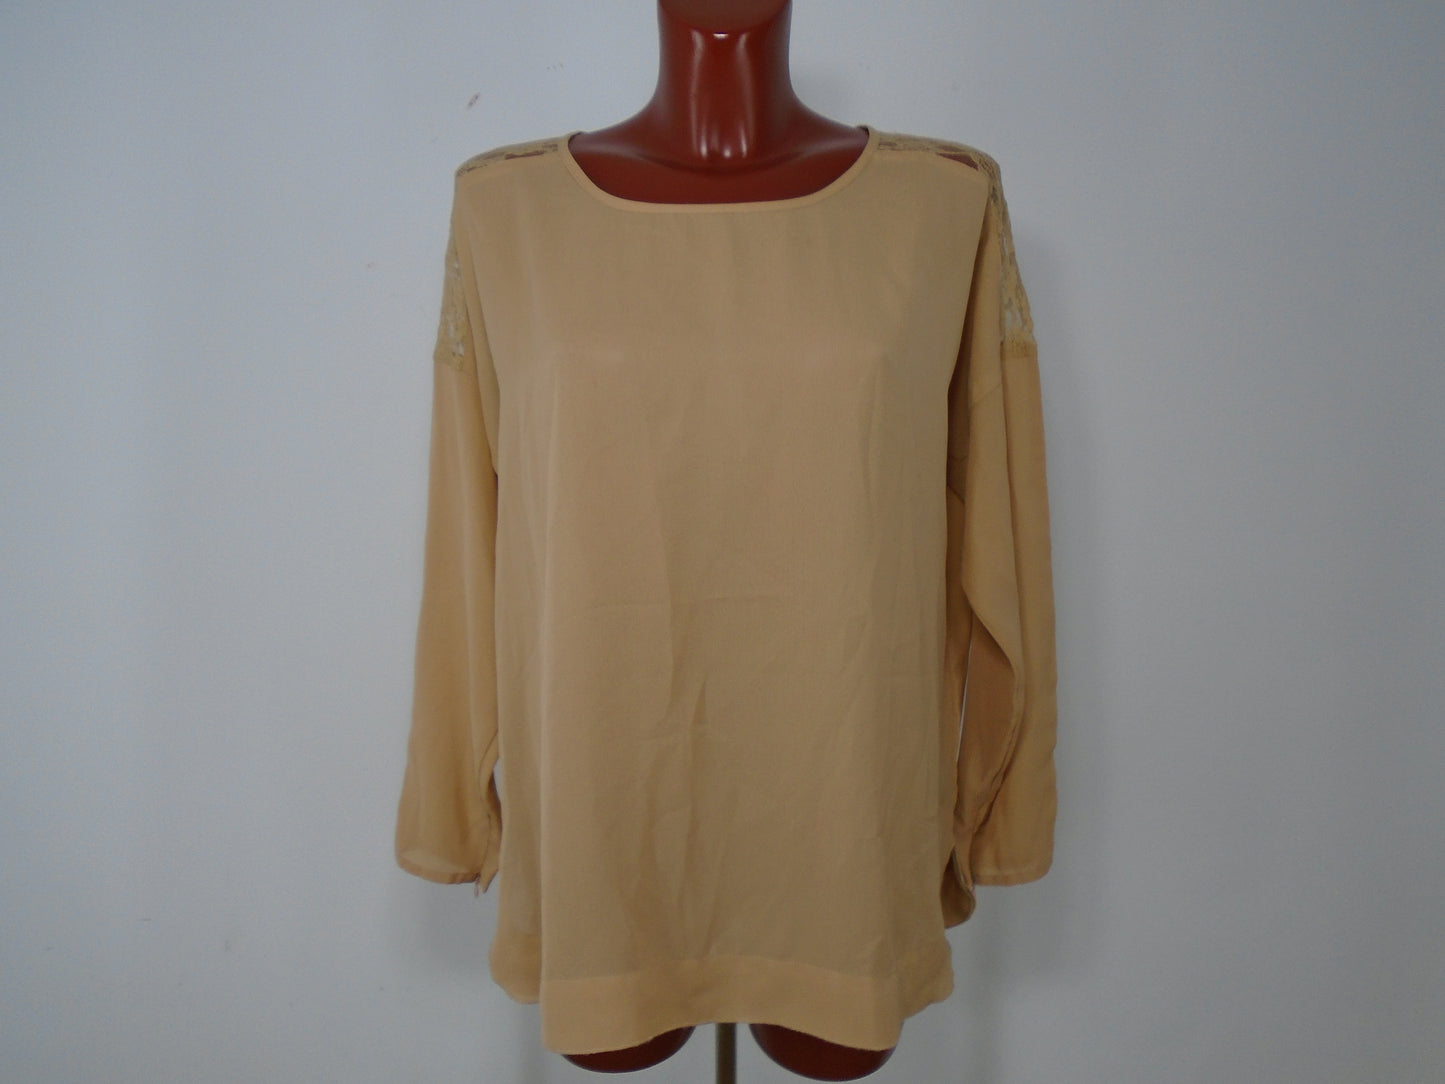 Women's Blouse Urban Outfitters. Beige. XL. Used. Very good condition